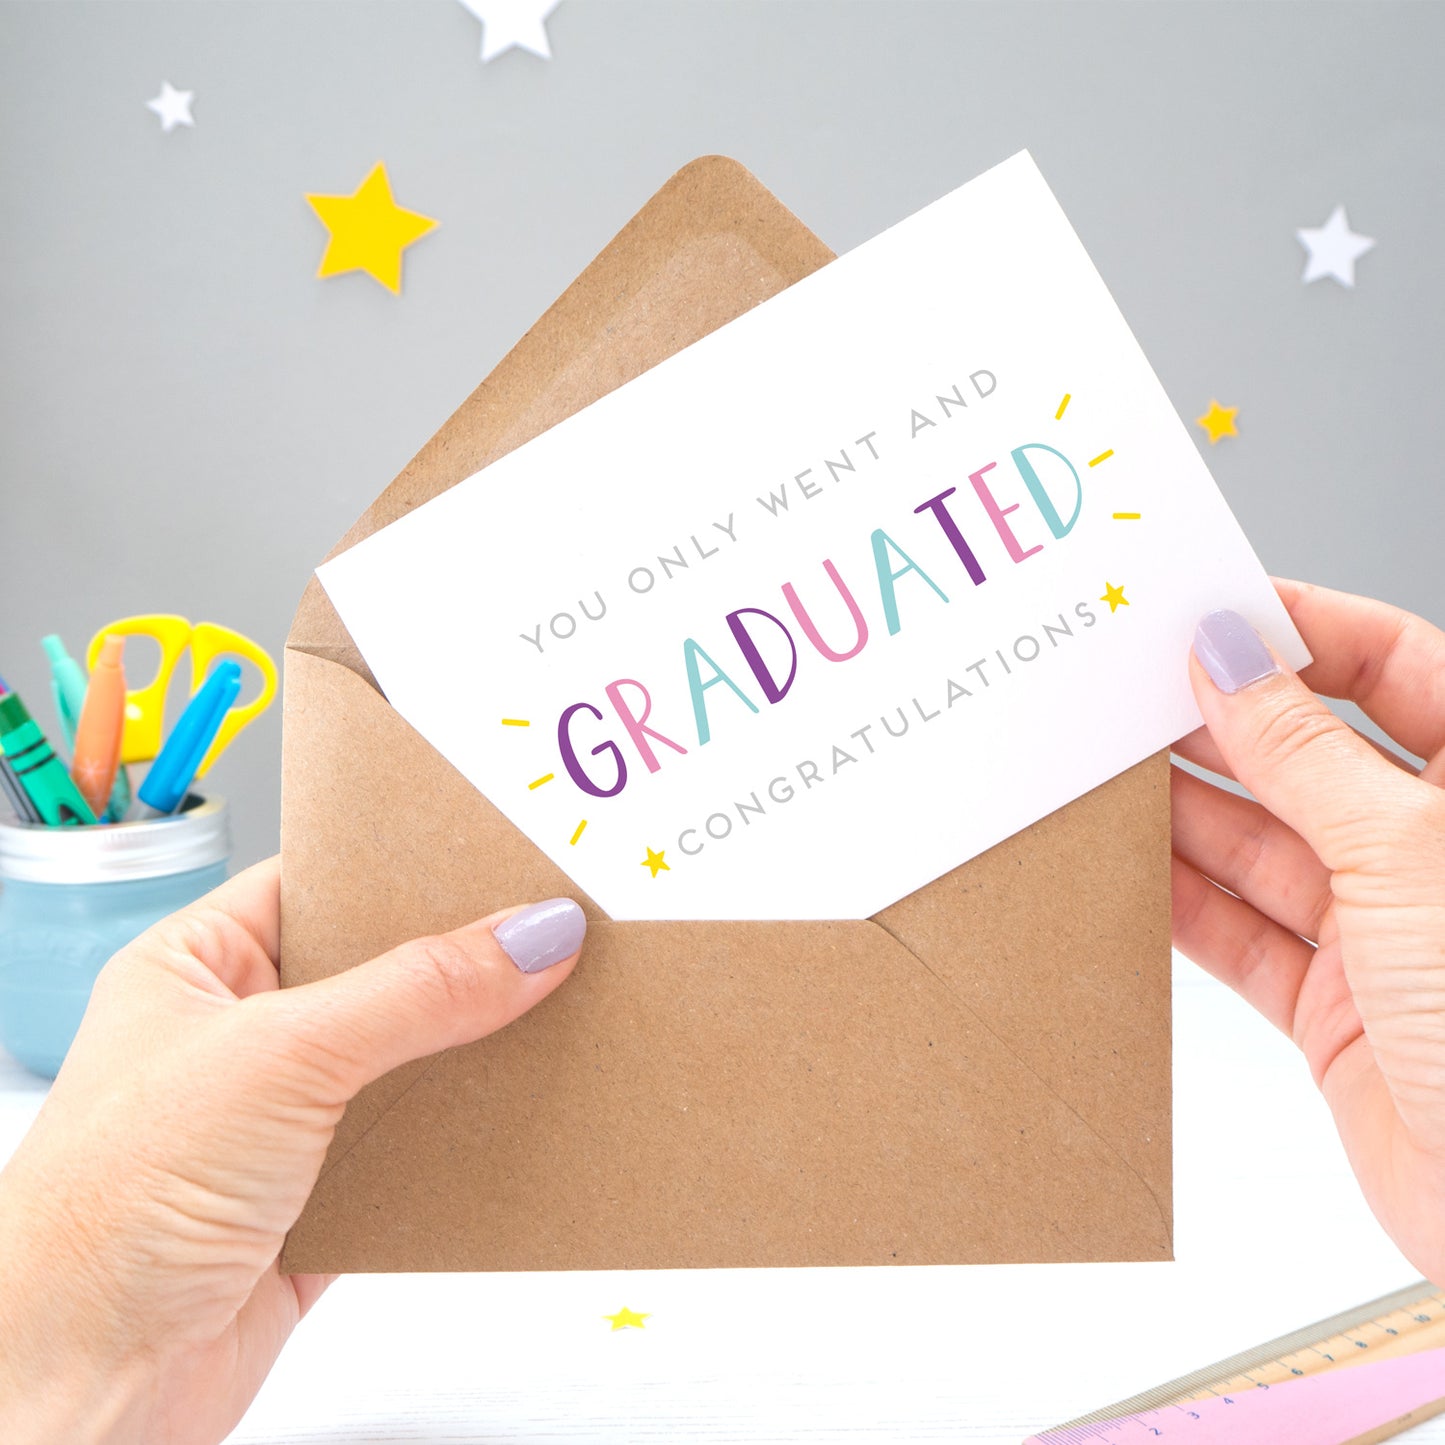 You only went and graduated congratulations card being pulled from an envelope by Joanne Hawker in front of a grey background with white and yellow stars. The typography is a mix of grey and varying tones of blue, pink and purple.